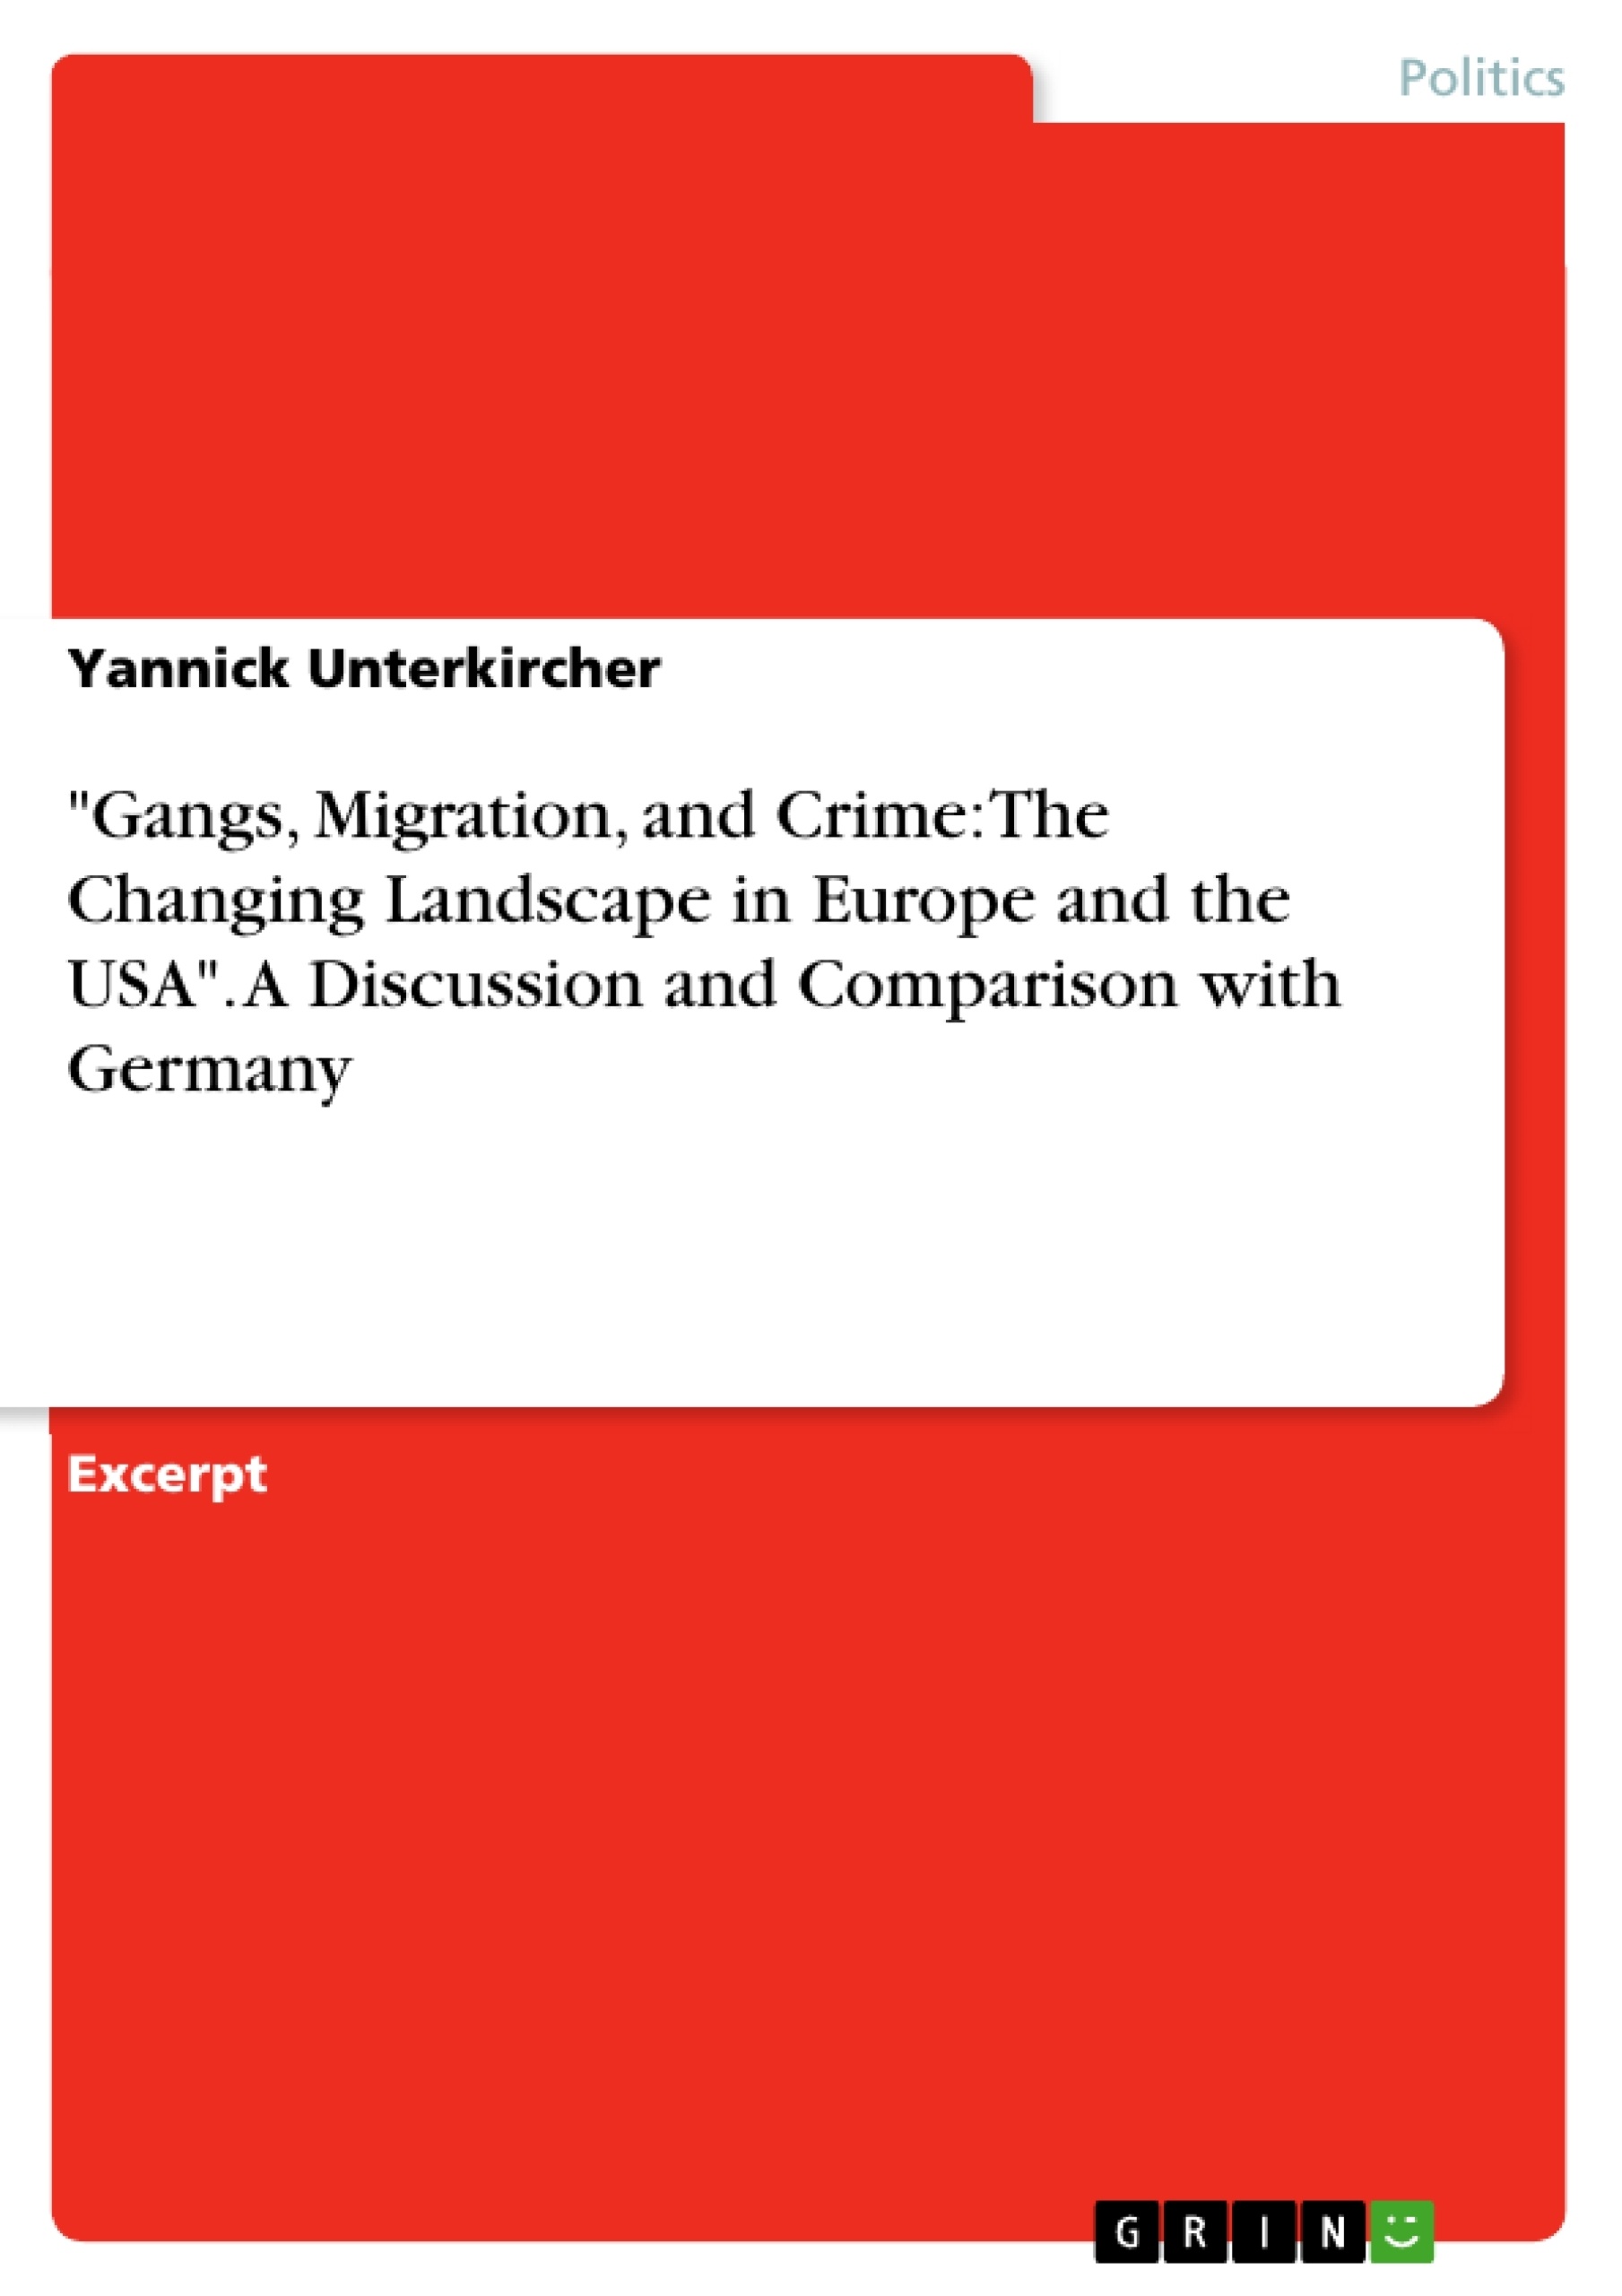 Titel: "Gangs, Migration, and Crime: The Changing Landscape in Europe and the USA". A Discussion and Comparison with Germany